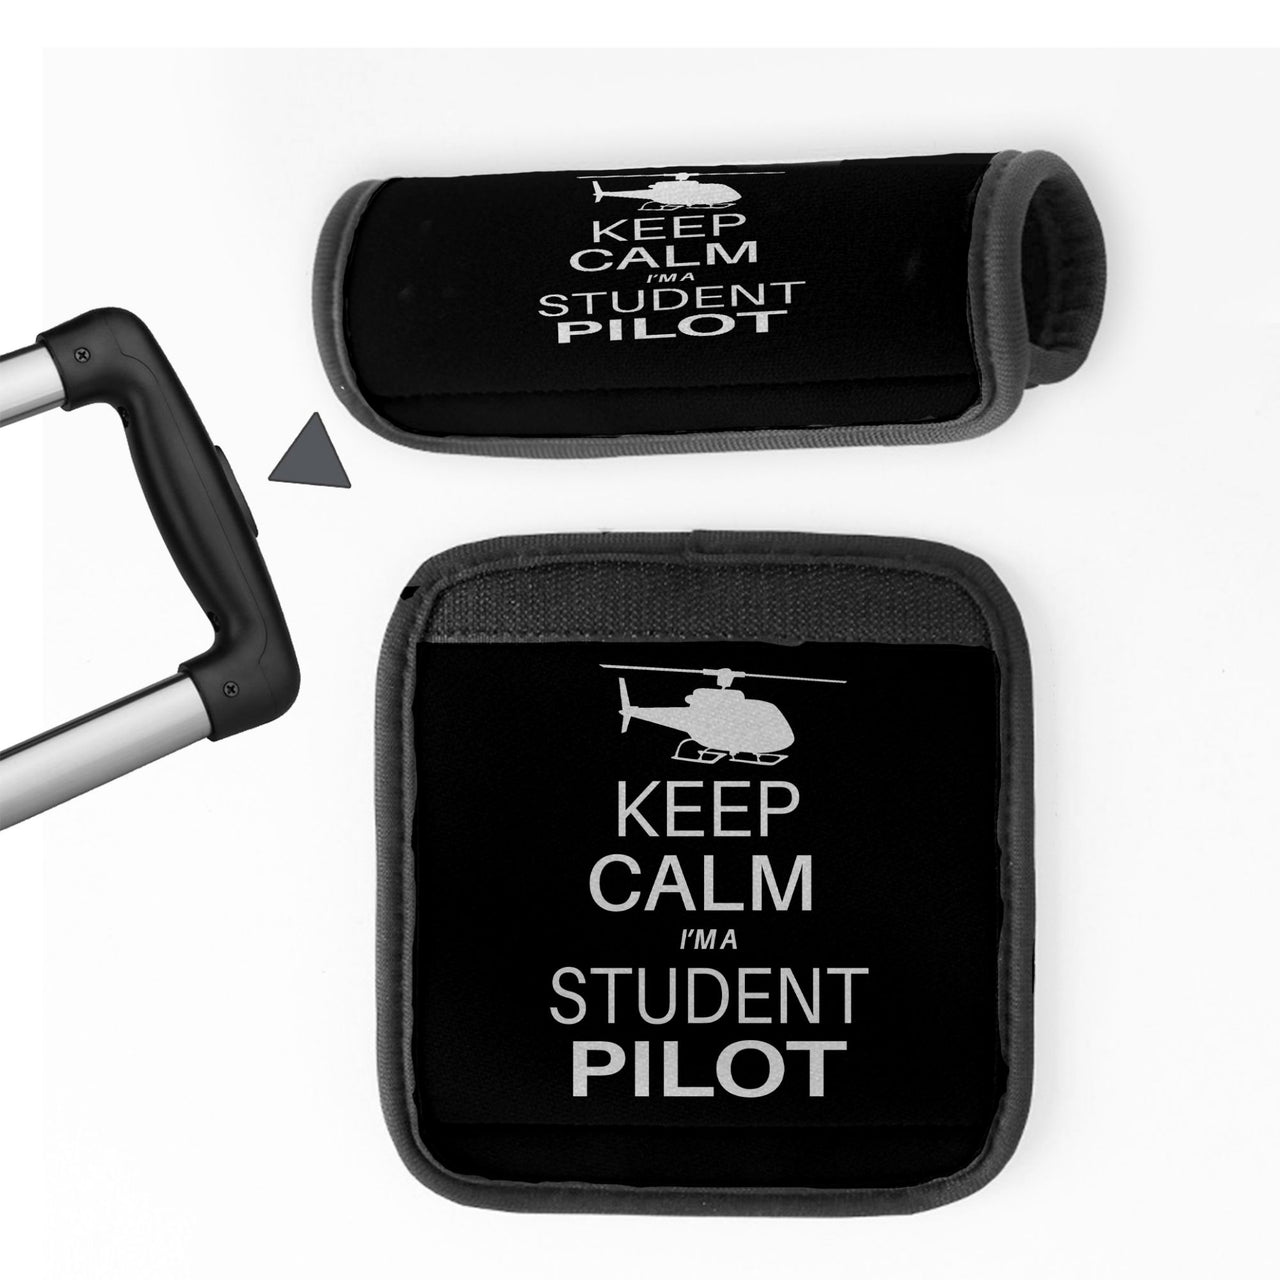 Student Pilot (Helicopter) Designed Neoprene Luggage Handle Covers